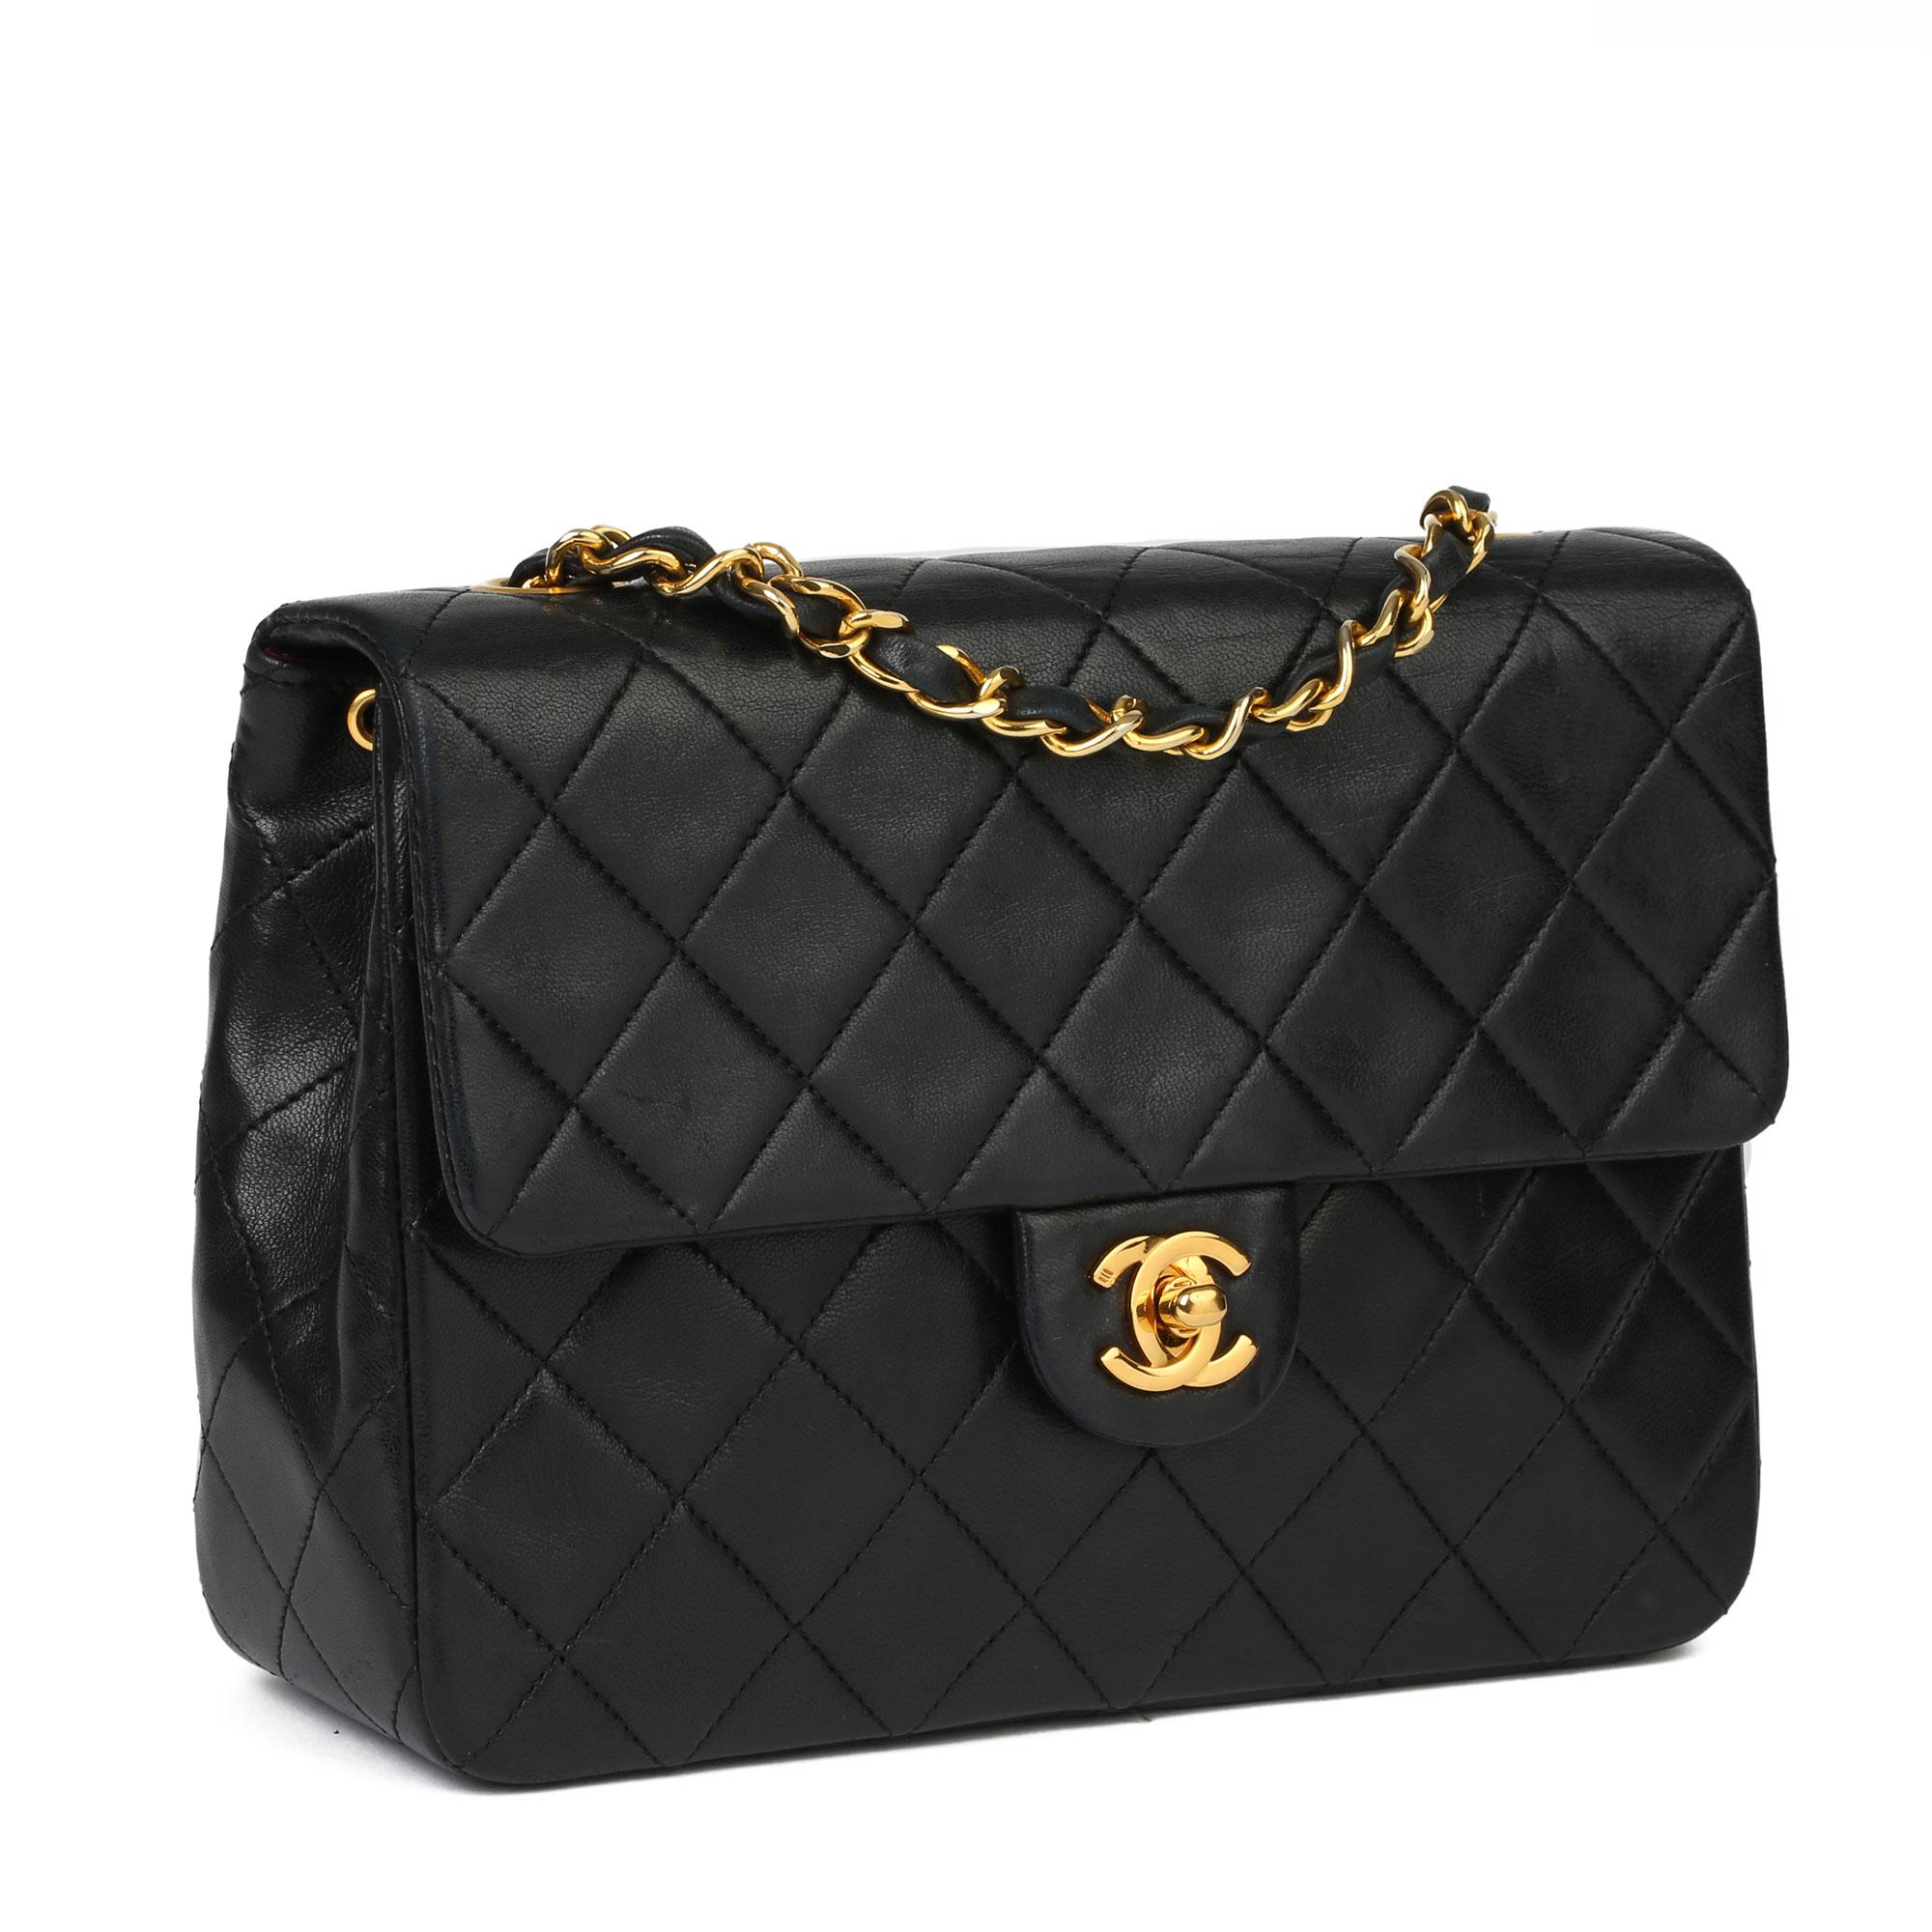 1996 Chanel Black Quilted Lambskin Mini Flap Bag  6